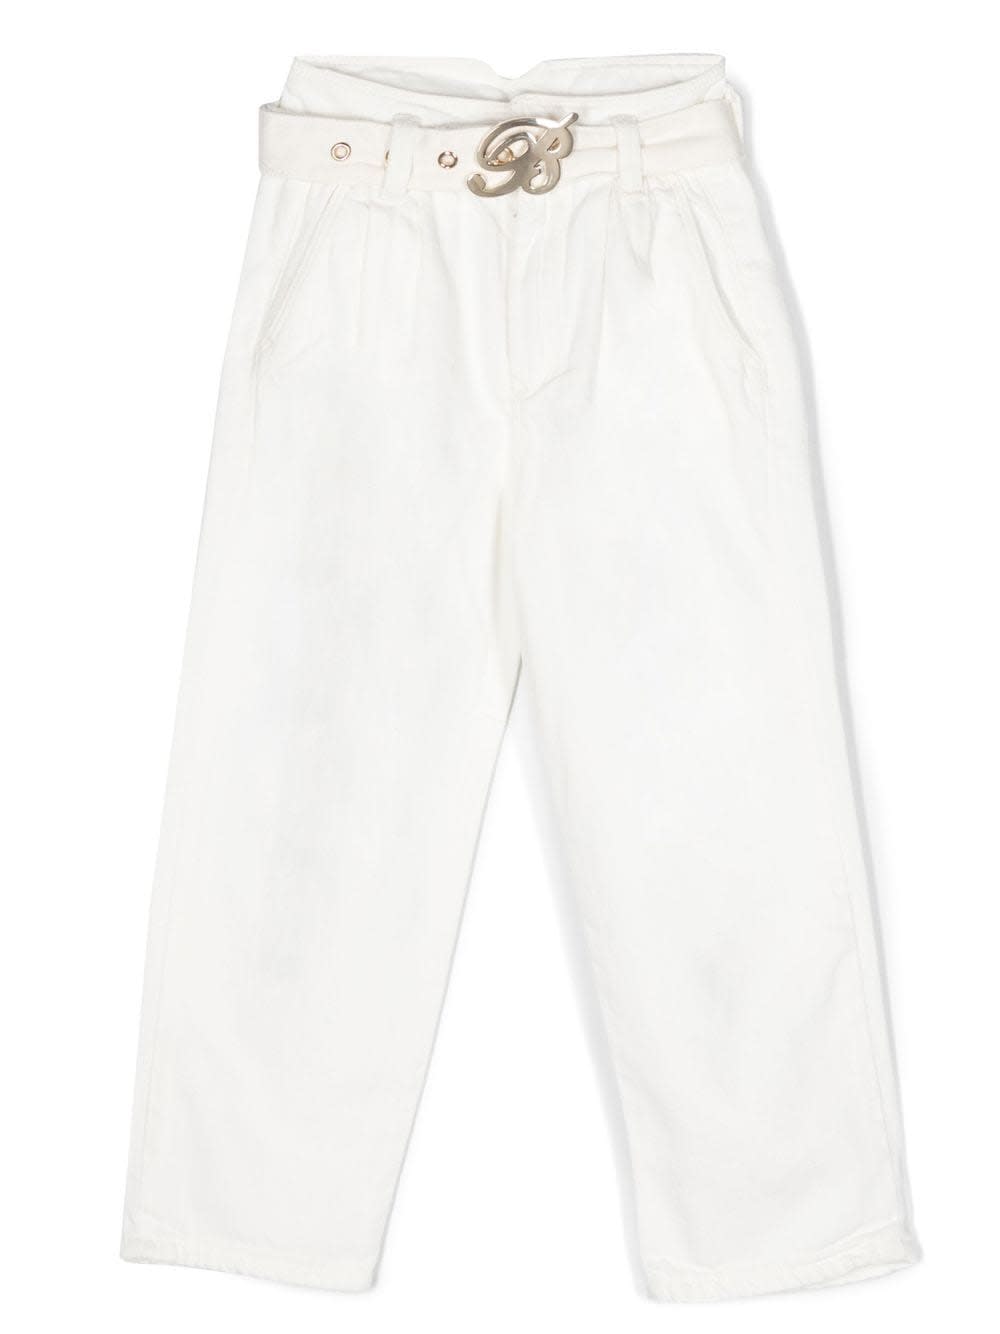 MISS BLUMARINE TROUSERS WITH LOGO